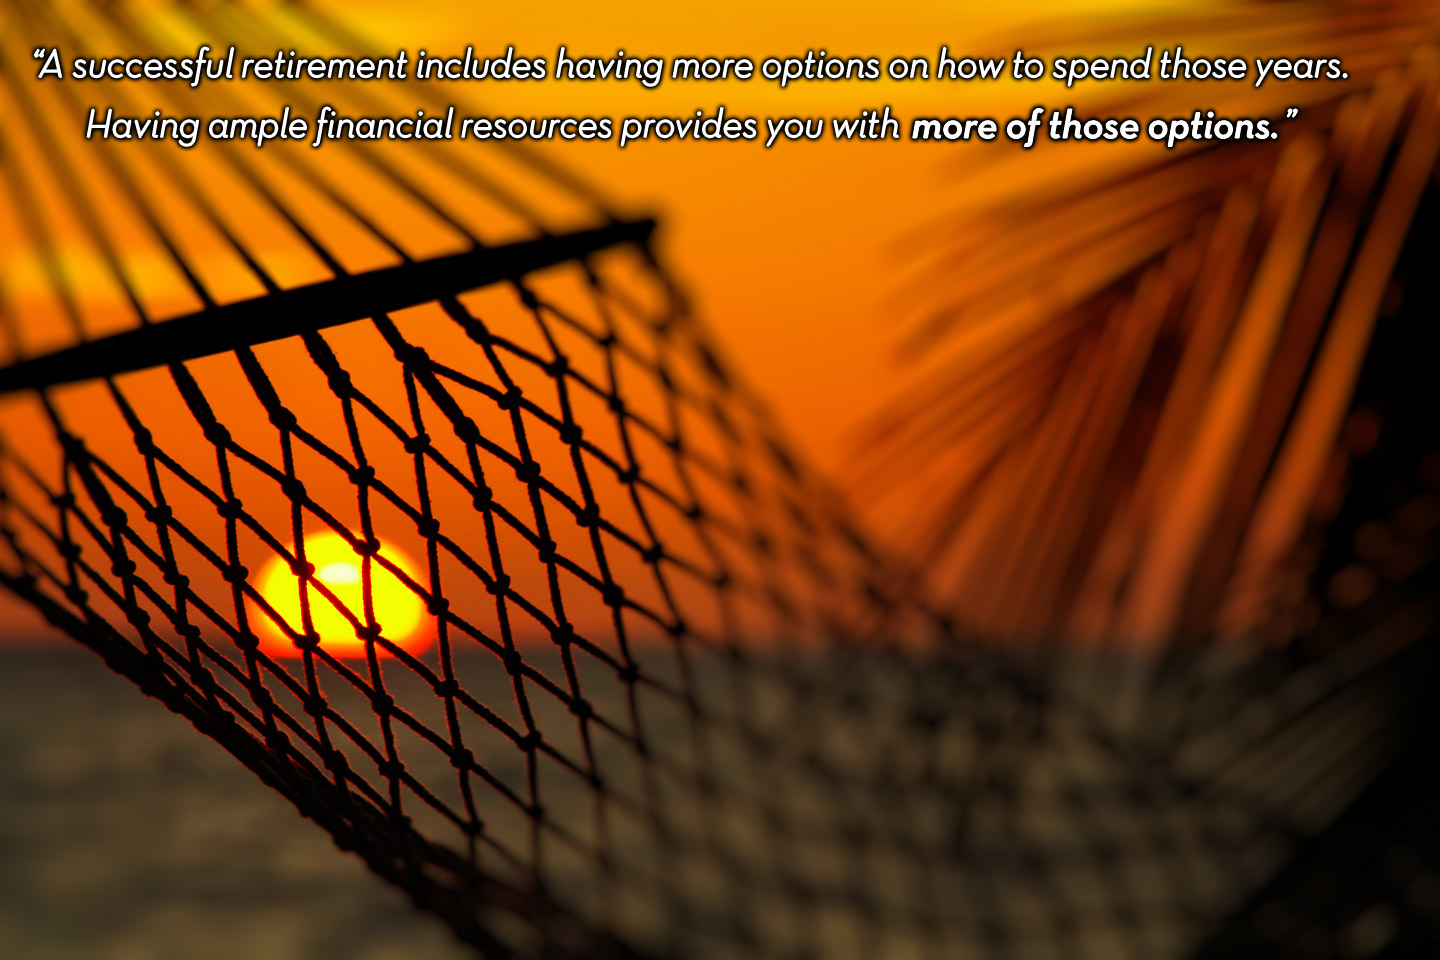 a close-up photo of a relaxing scene: a beautiful golden setting sun shining through the webbing of a hammock suggestive of a relaxing retirement